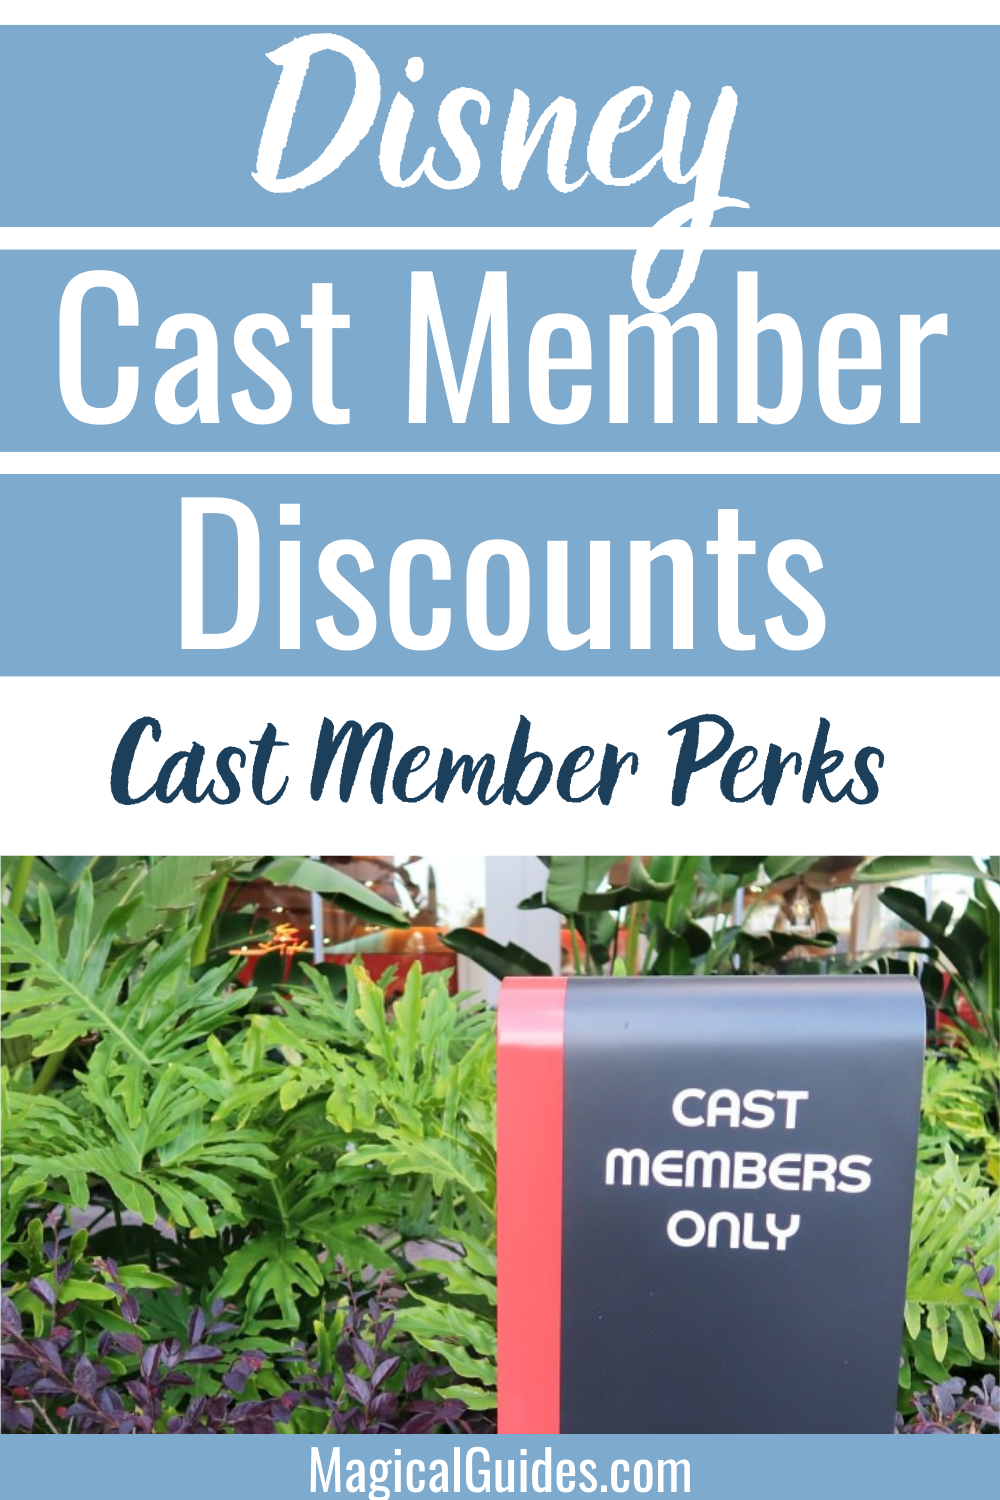 Guide to the perks and discounts Disney World Cast Members receive while they are employees.